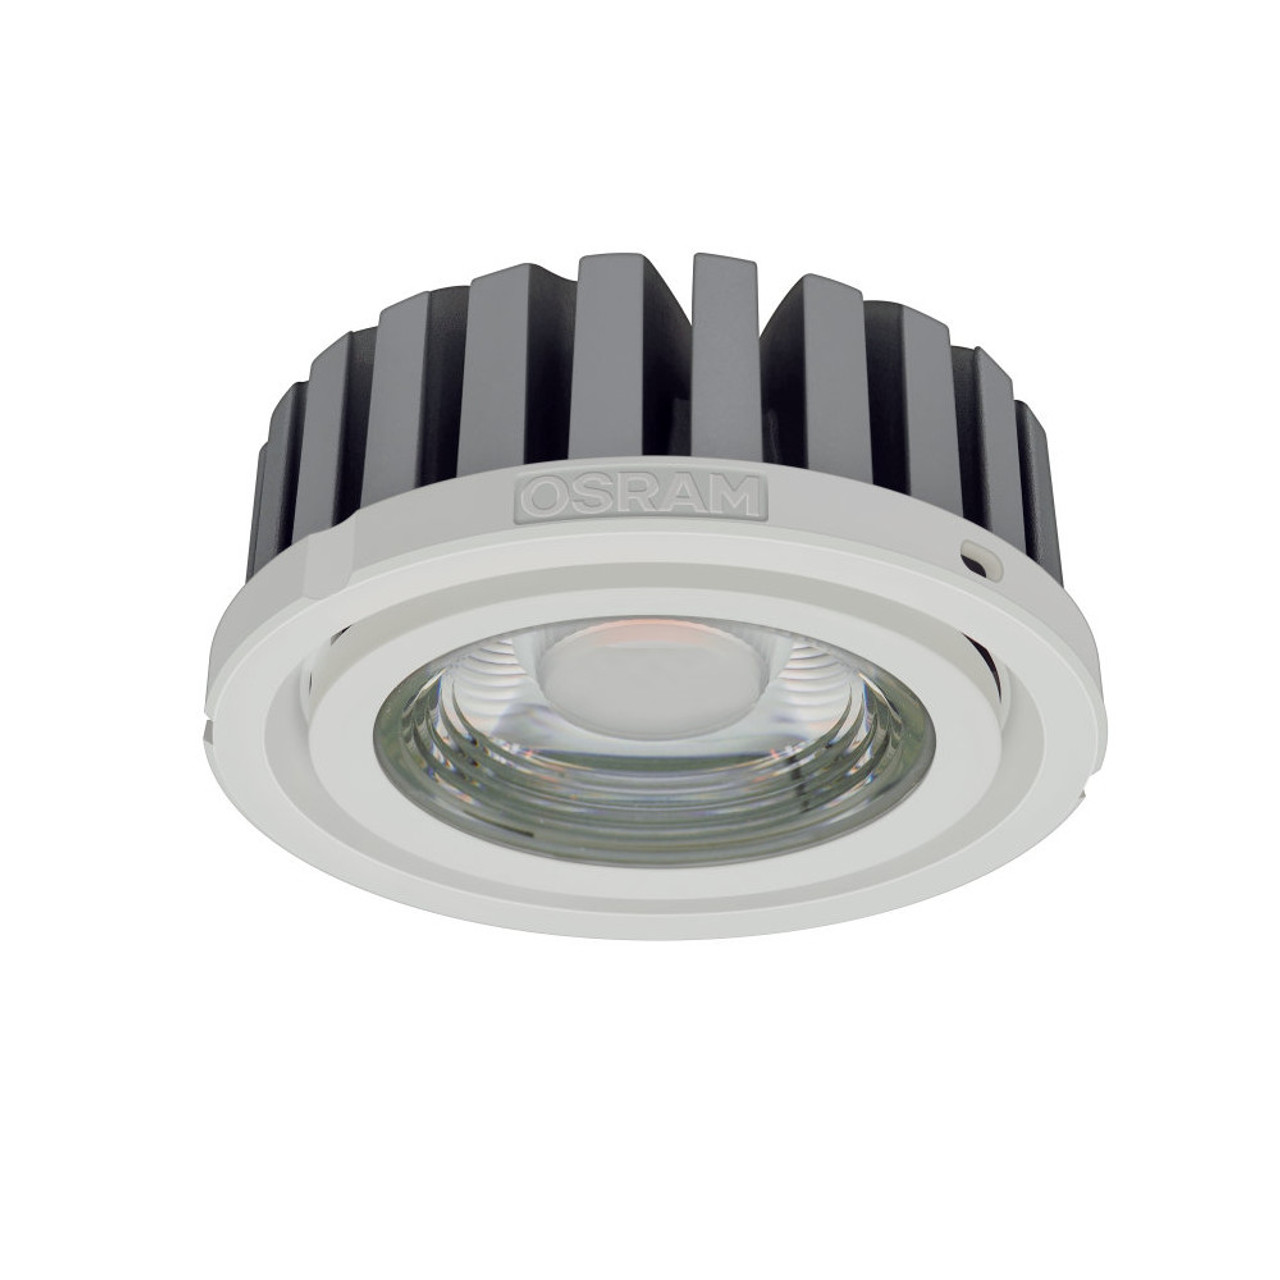 LED 700mA Constant Current 25.4W Dimmable 4000K CRi90 2300lm 40 degrees COB